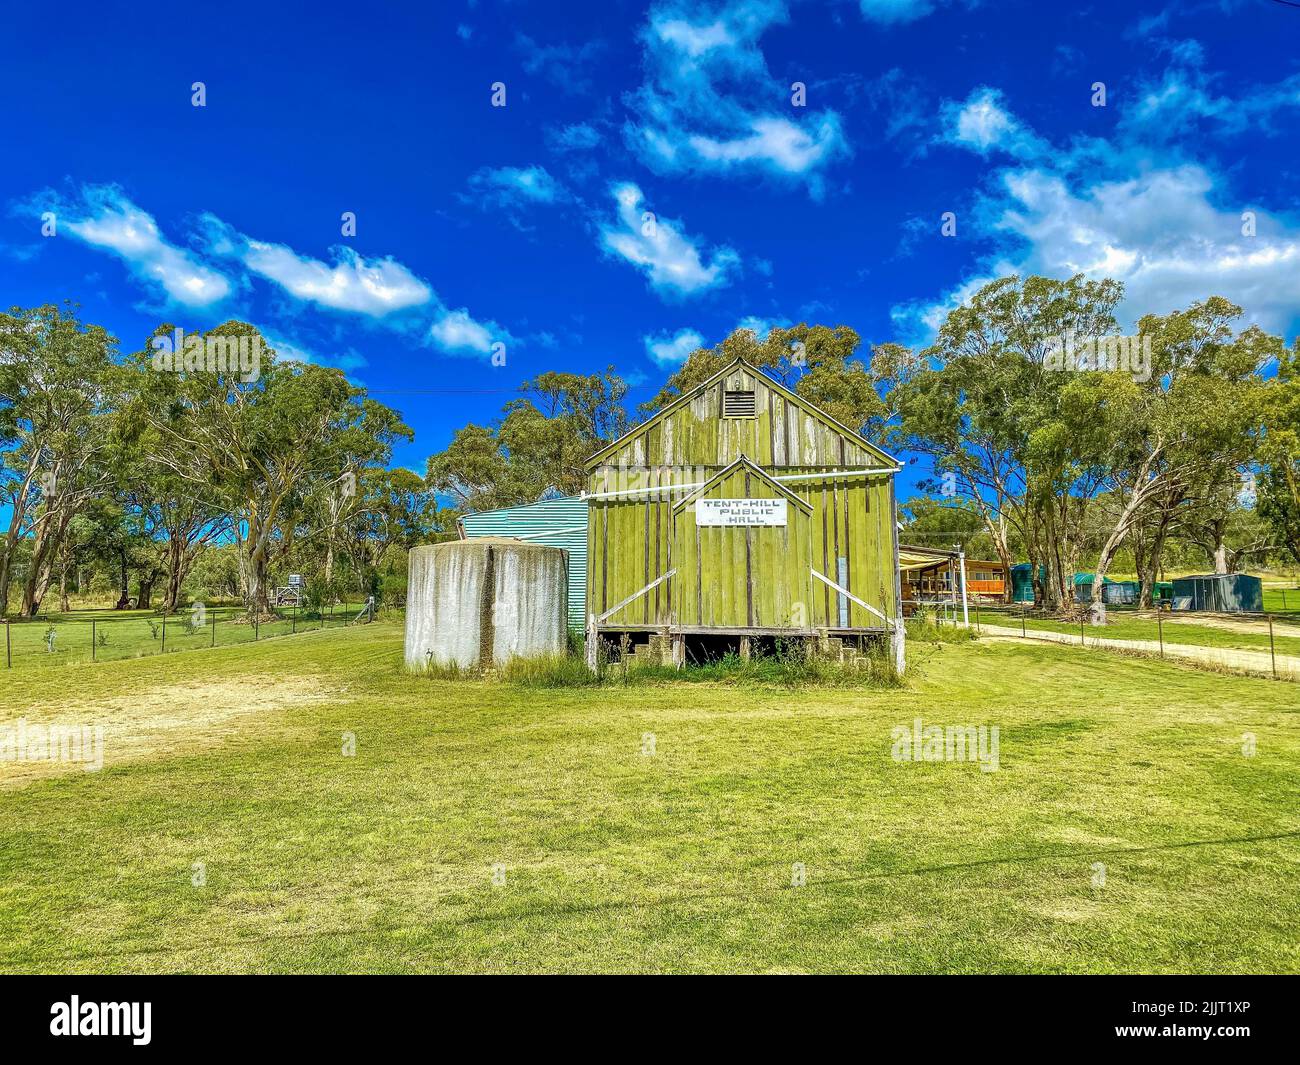 A beautiful view of old Tent Hill Public Hall in a little village in Australia against a blue sky Stock Photo